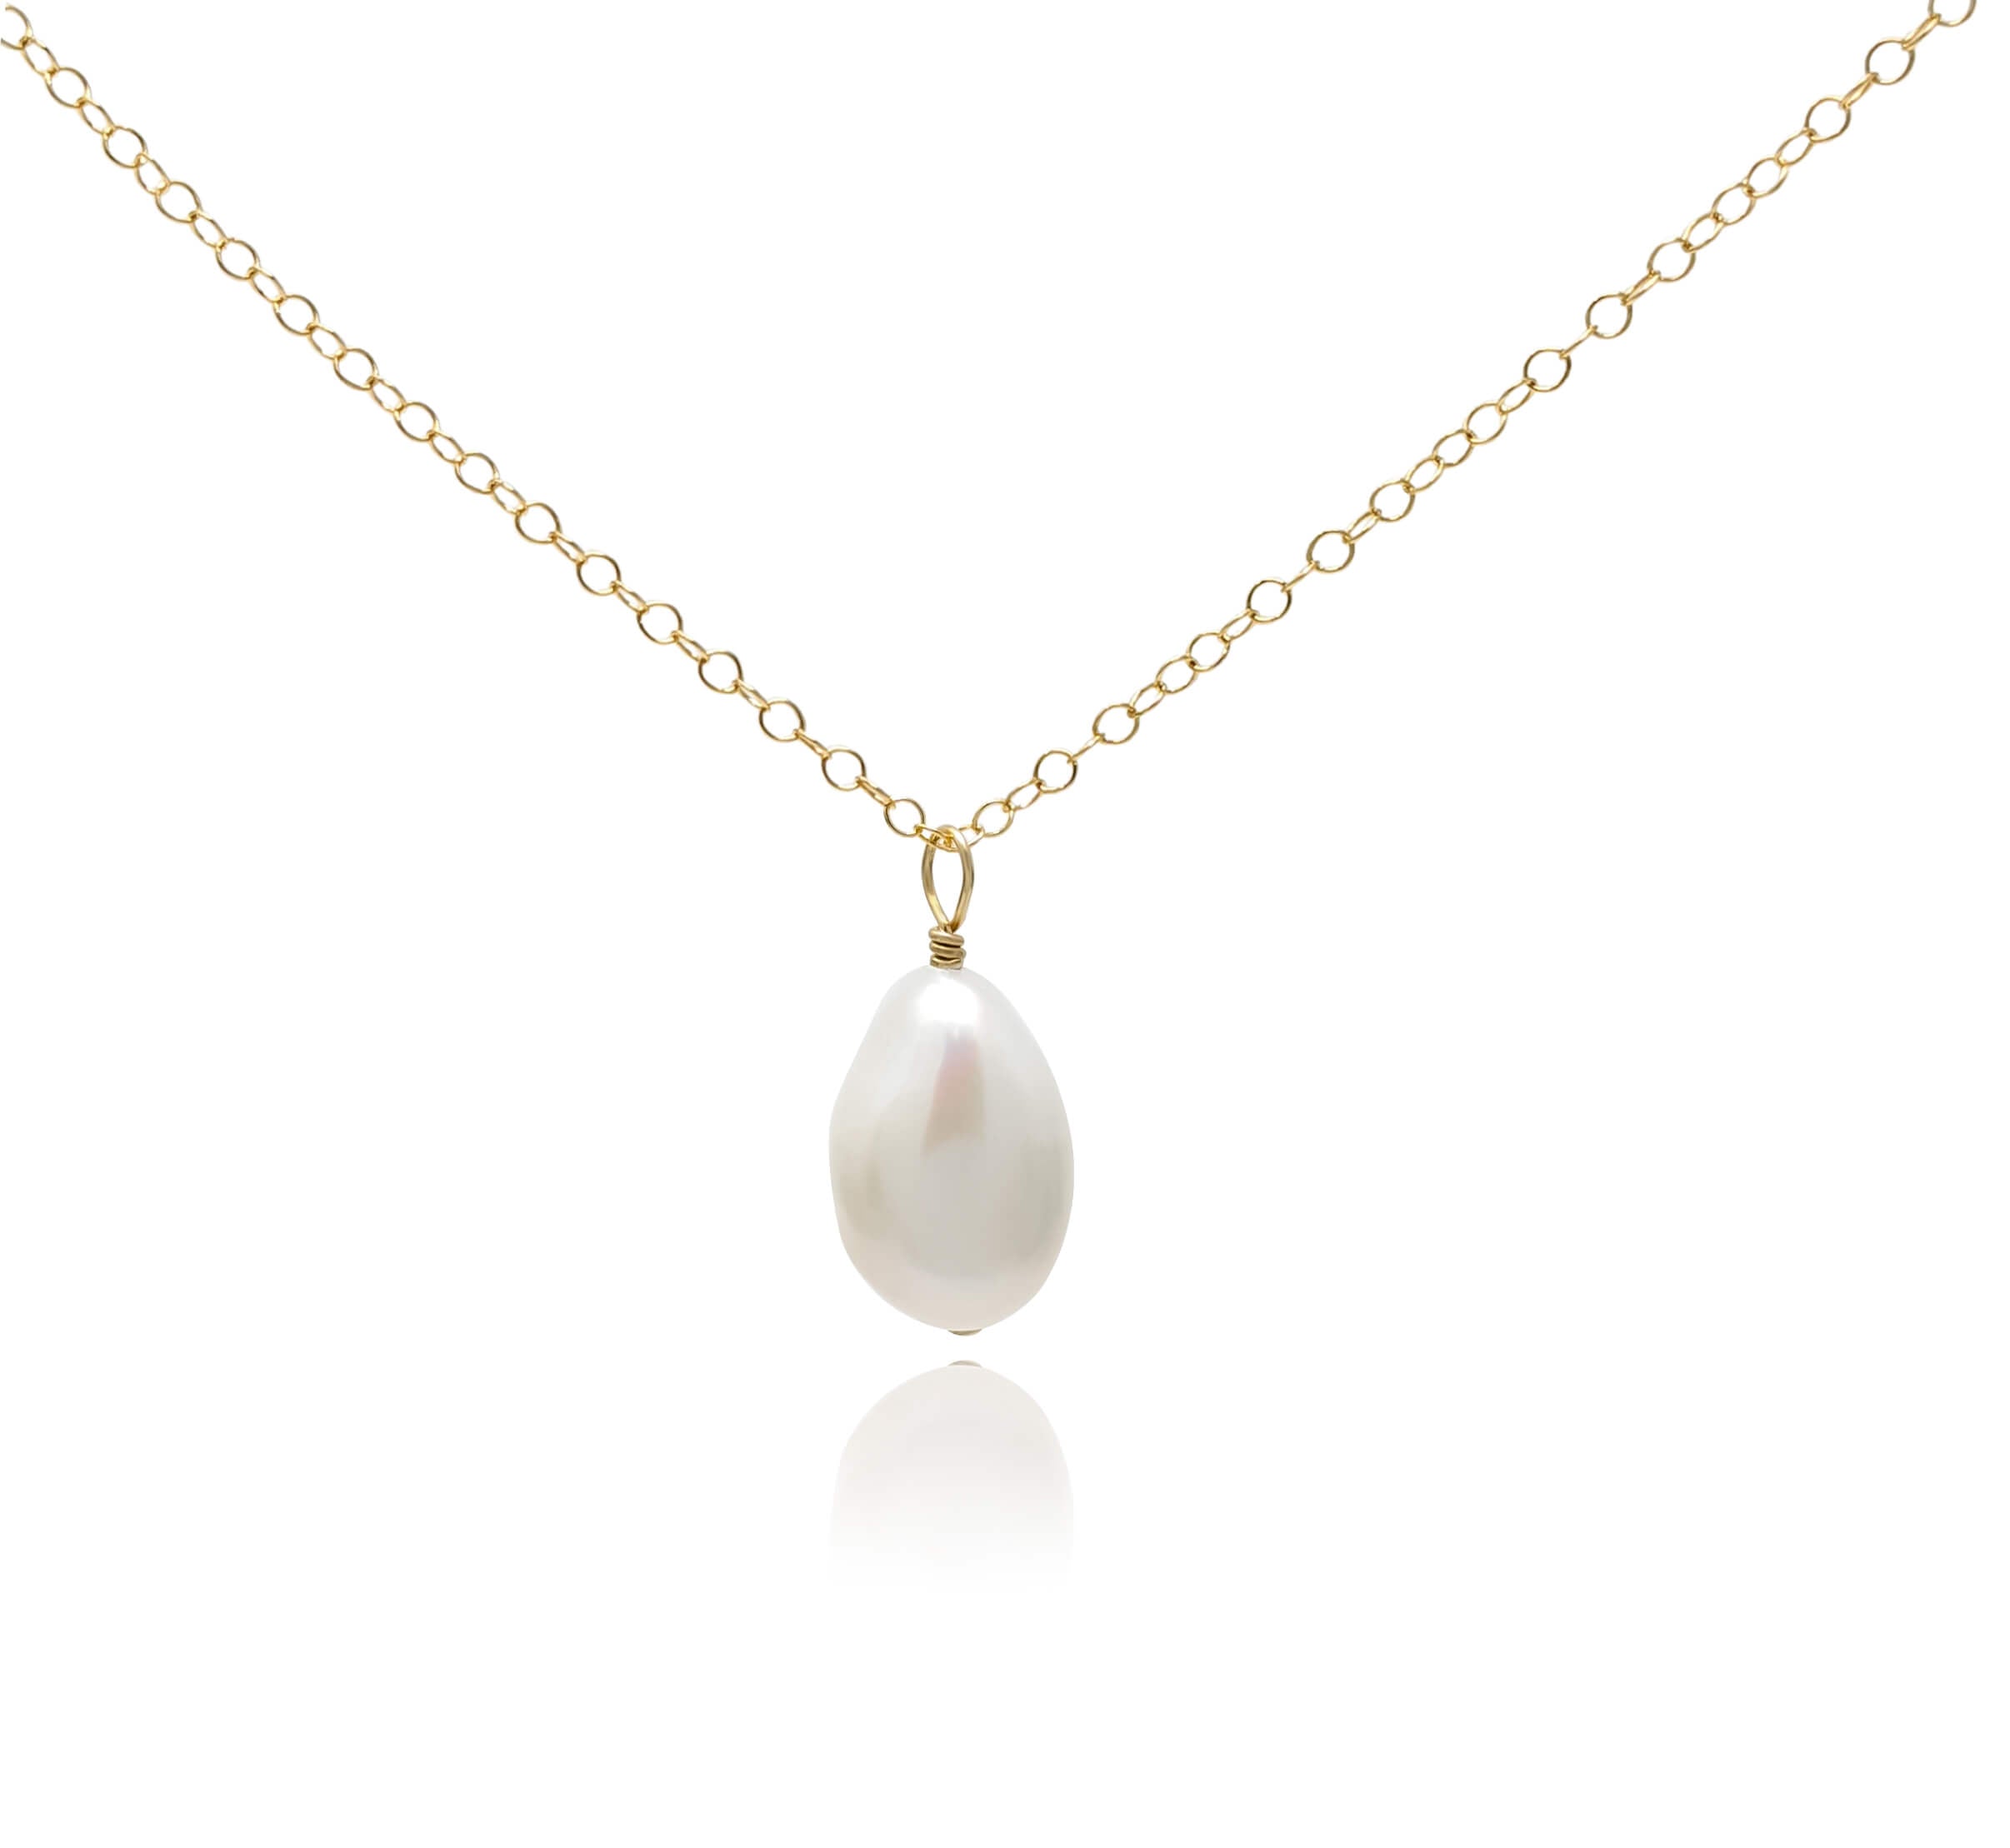 White pearl pendant necklace on gold filled chain